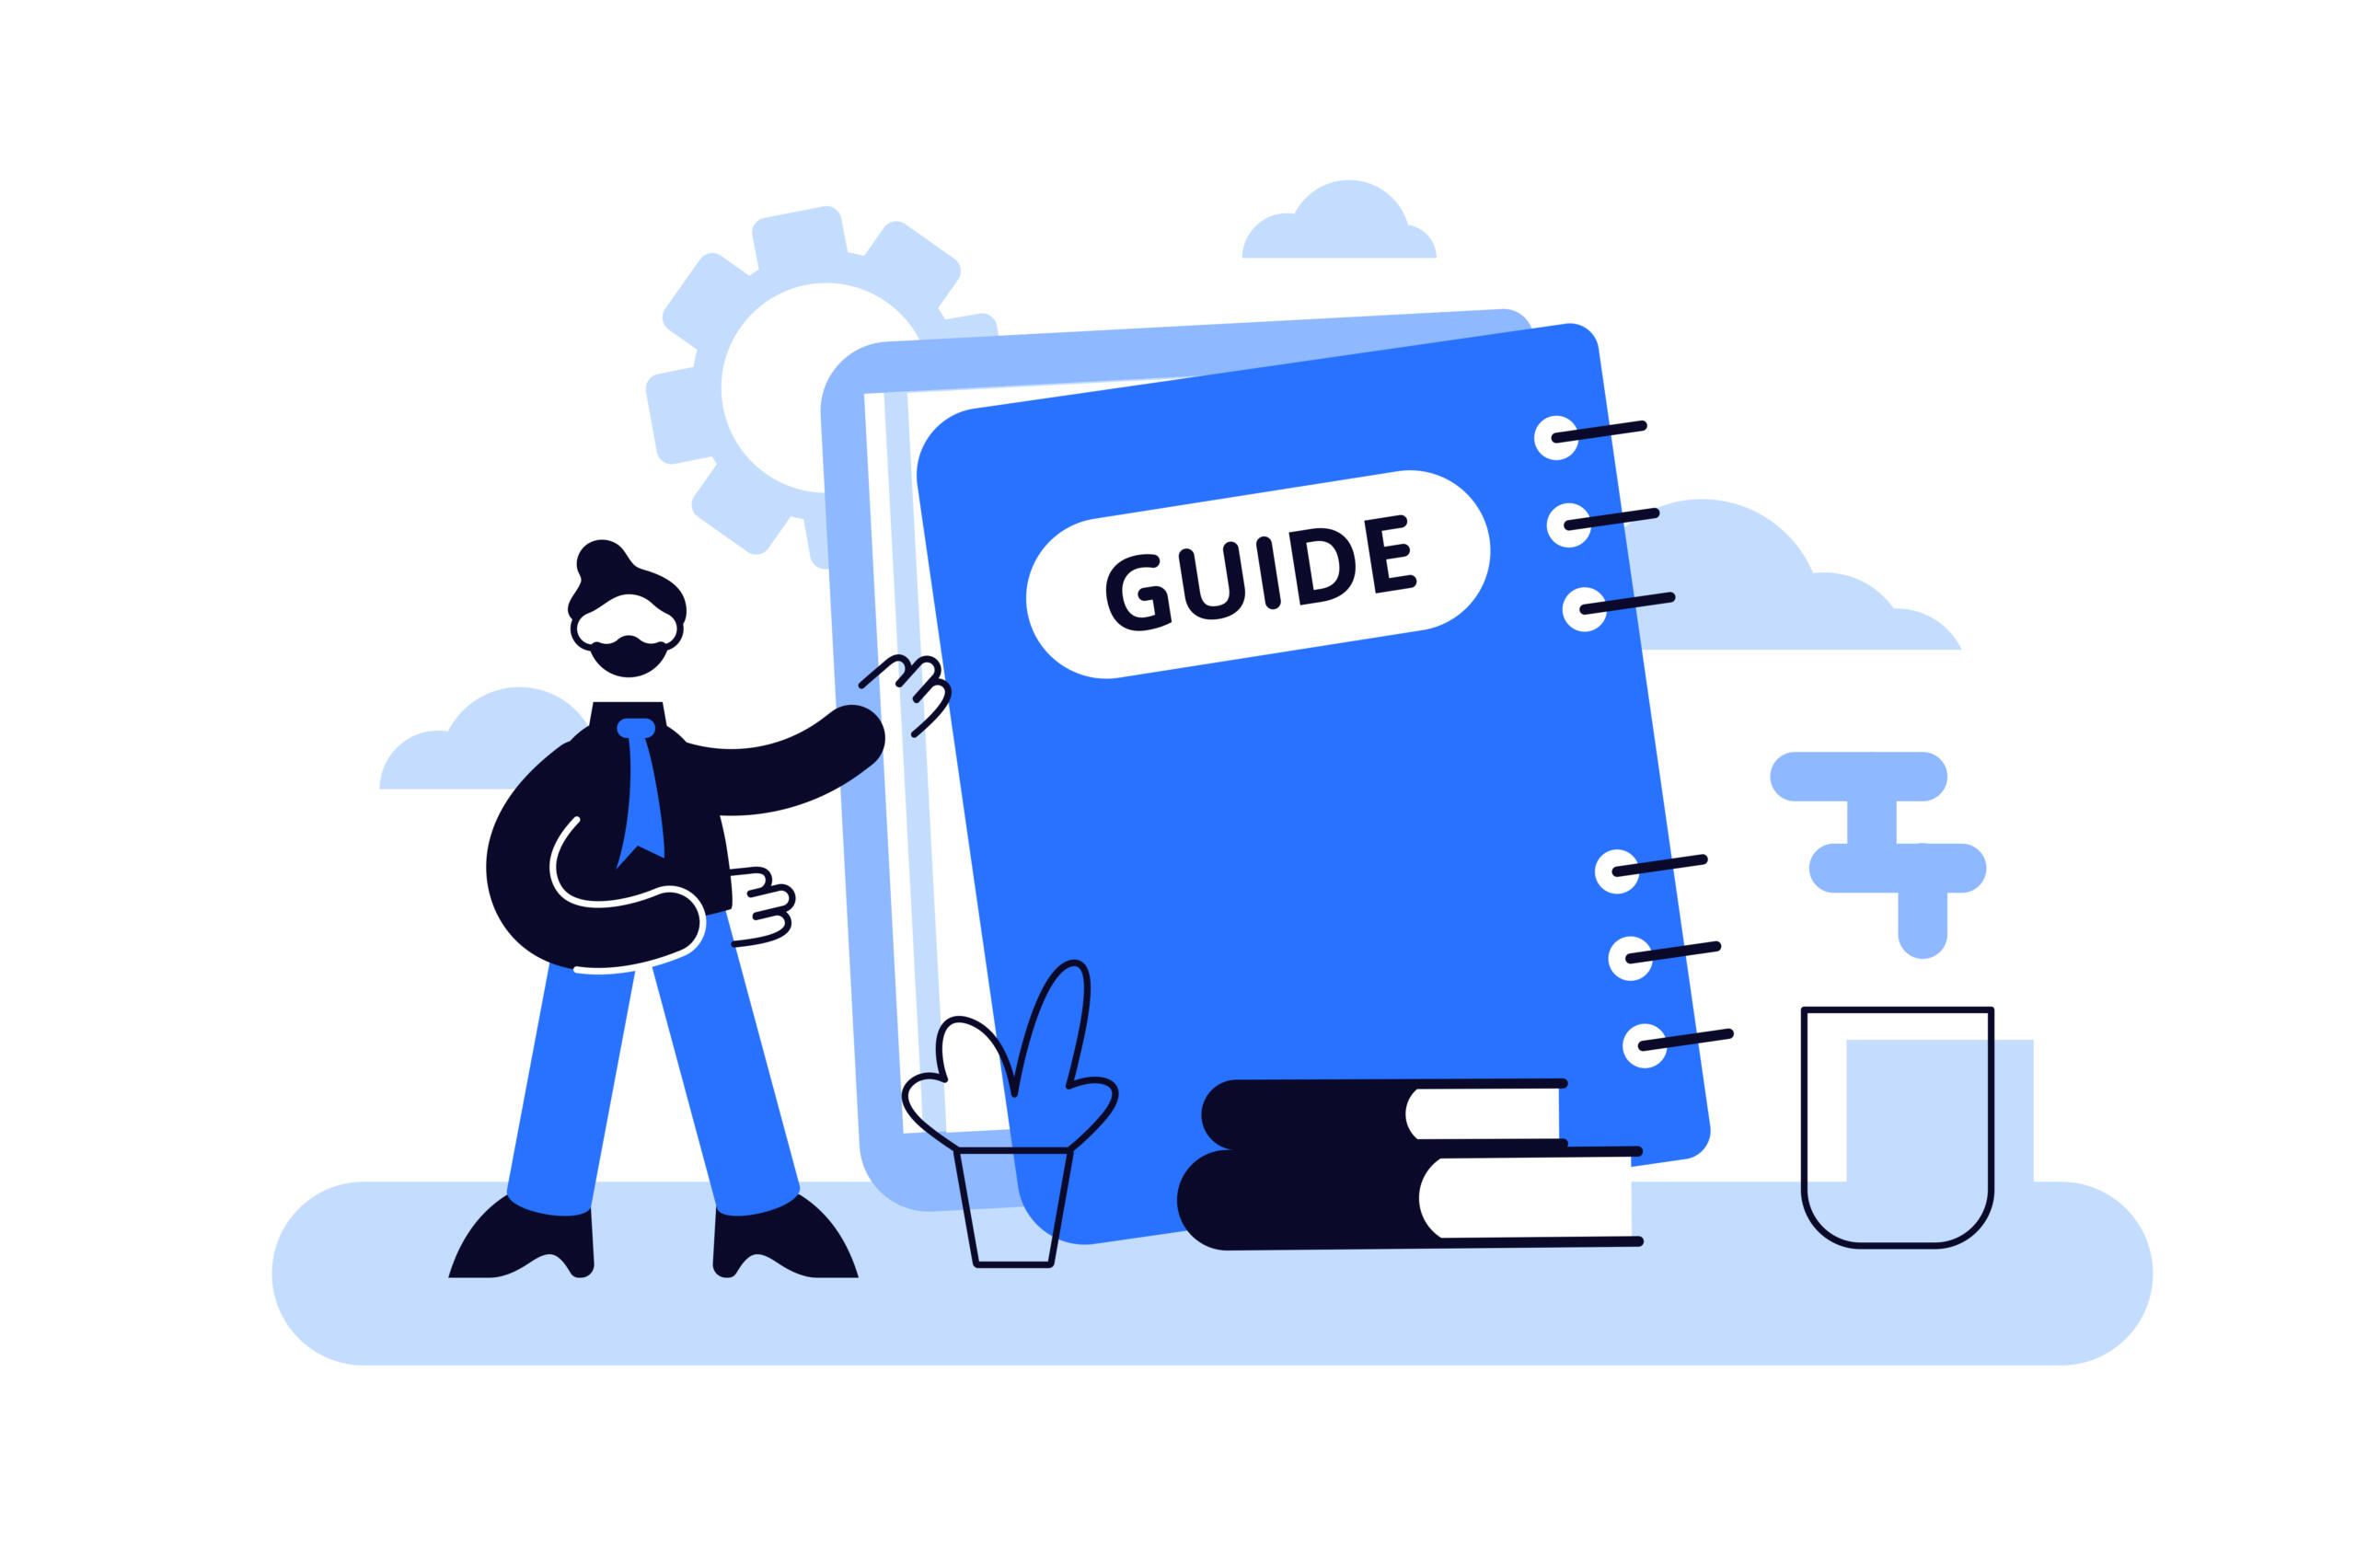 How-to Guides: Create Step-by-Step Tutorials for Your Product or Service